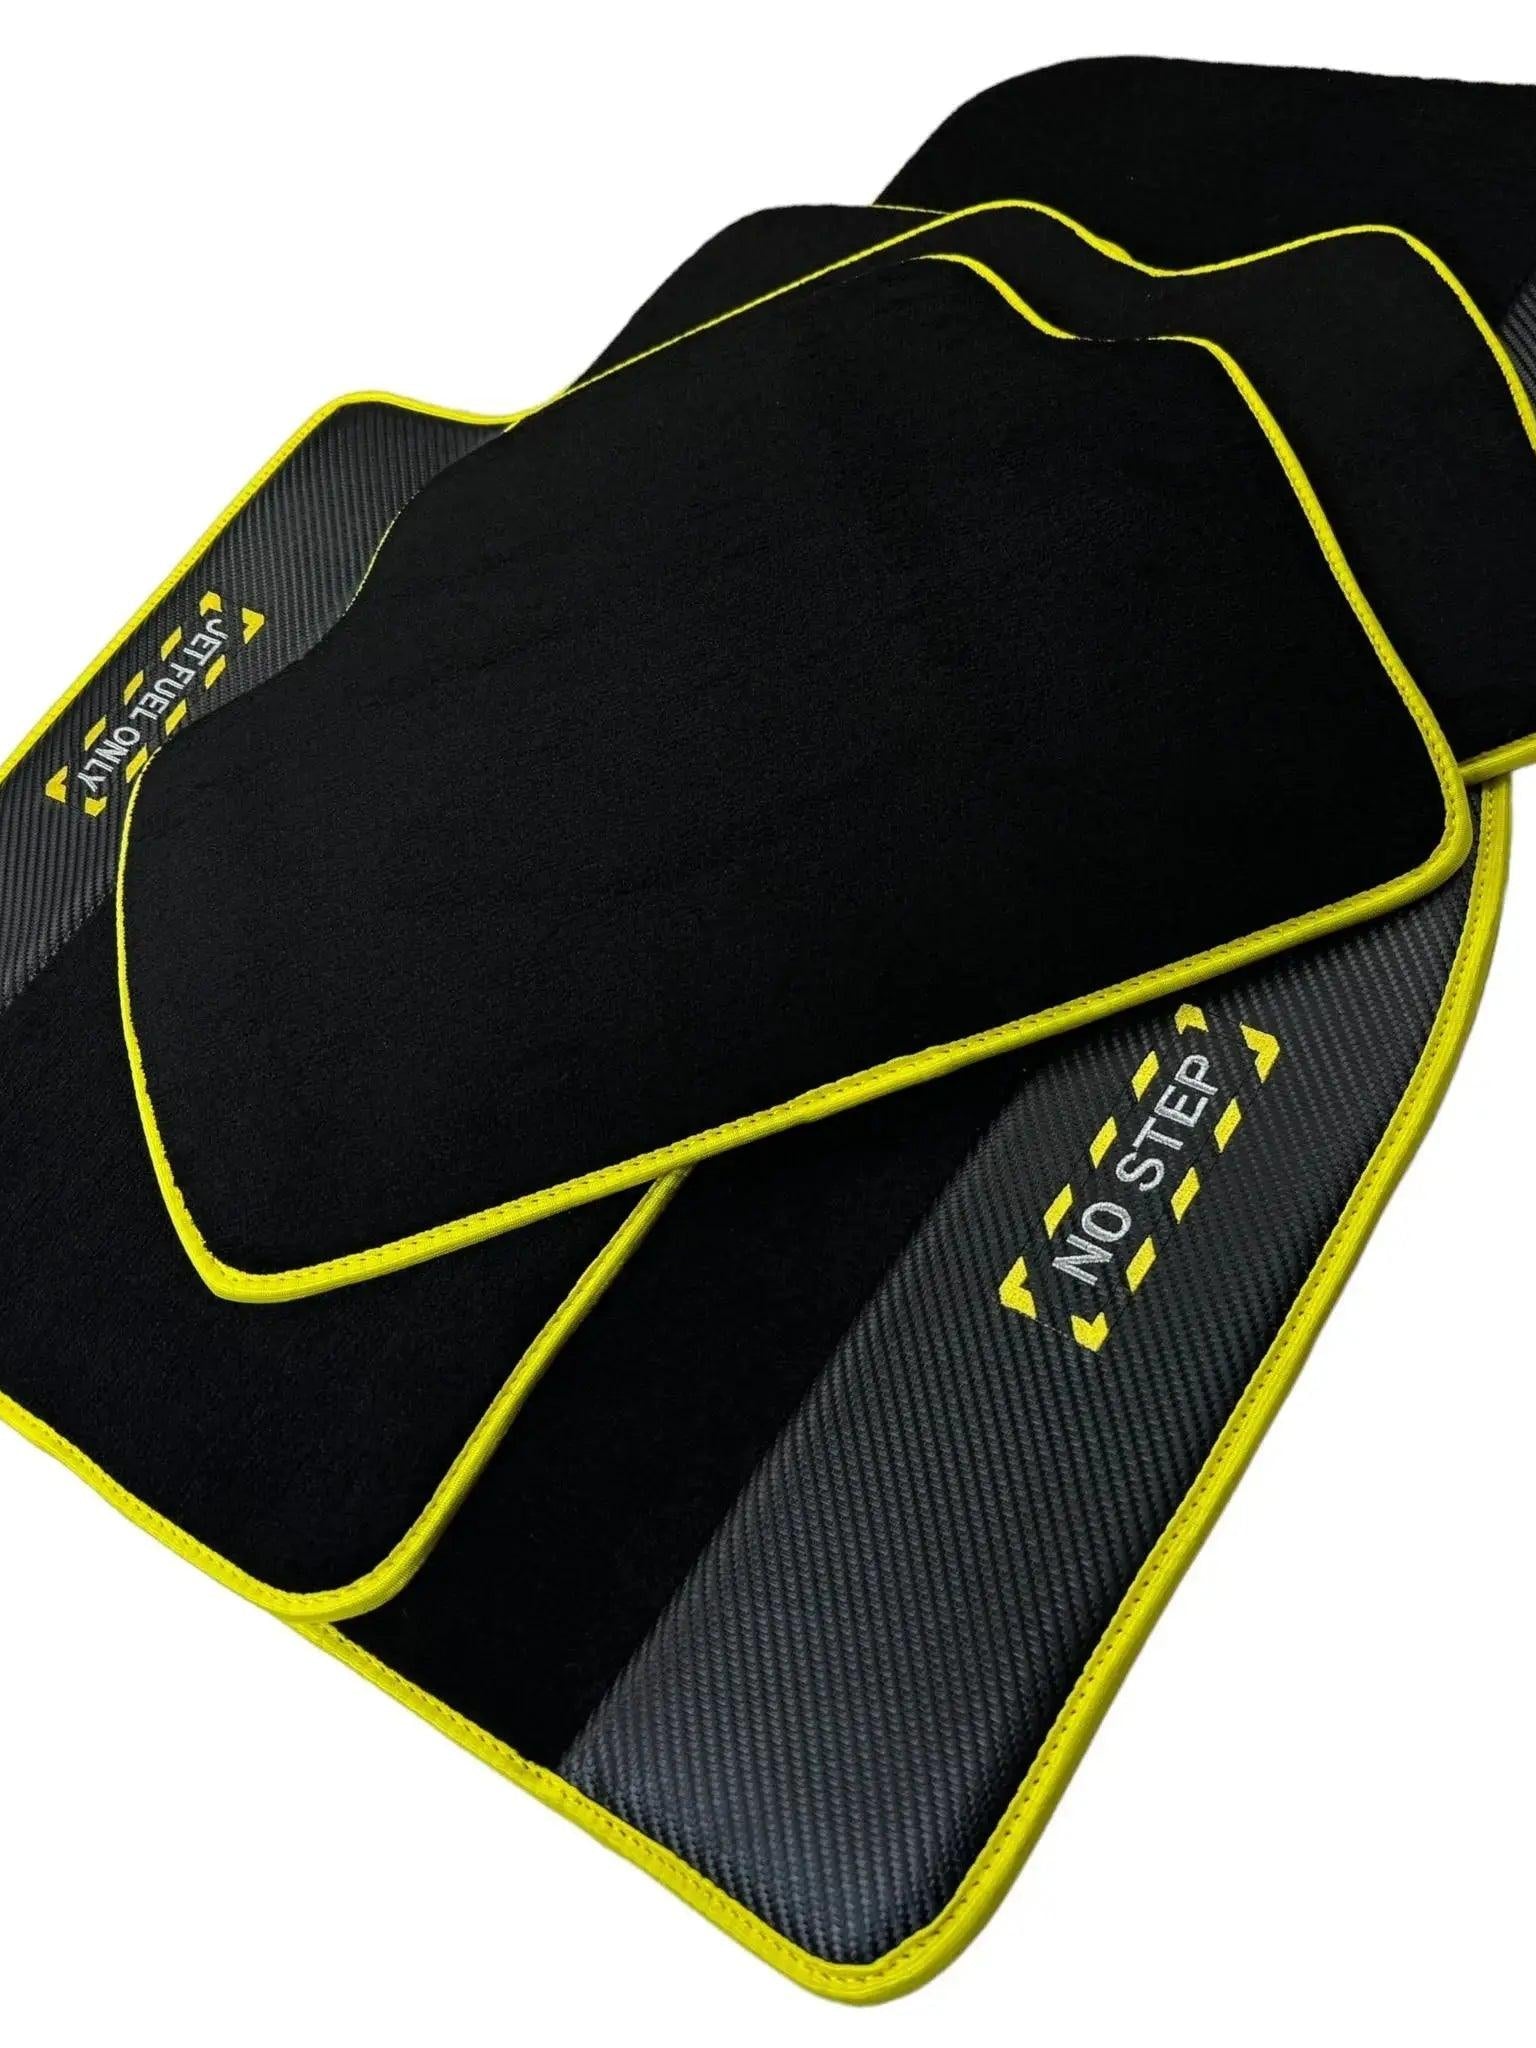 Black Floor Mats For BMW 1 Series F40 | Fighter Jet Edition | Yellow Trim Autowin Brand - AutoWin